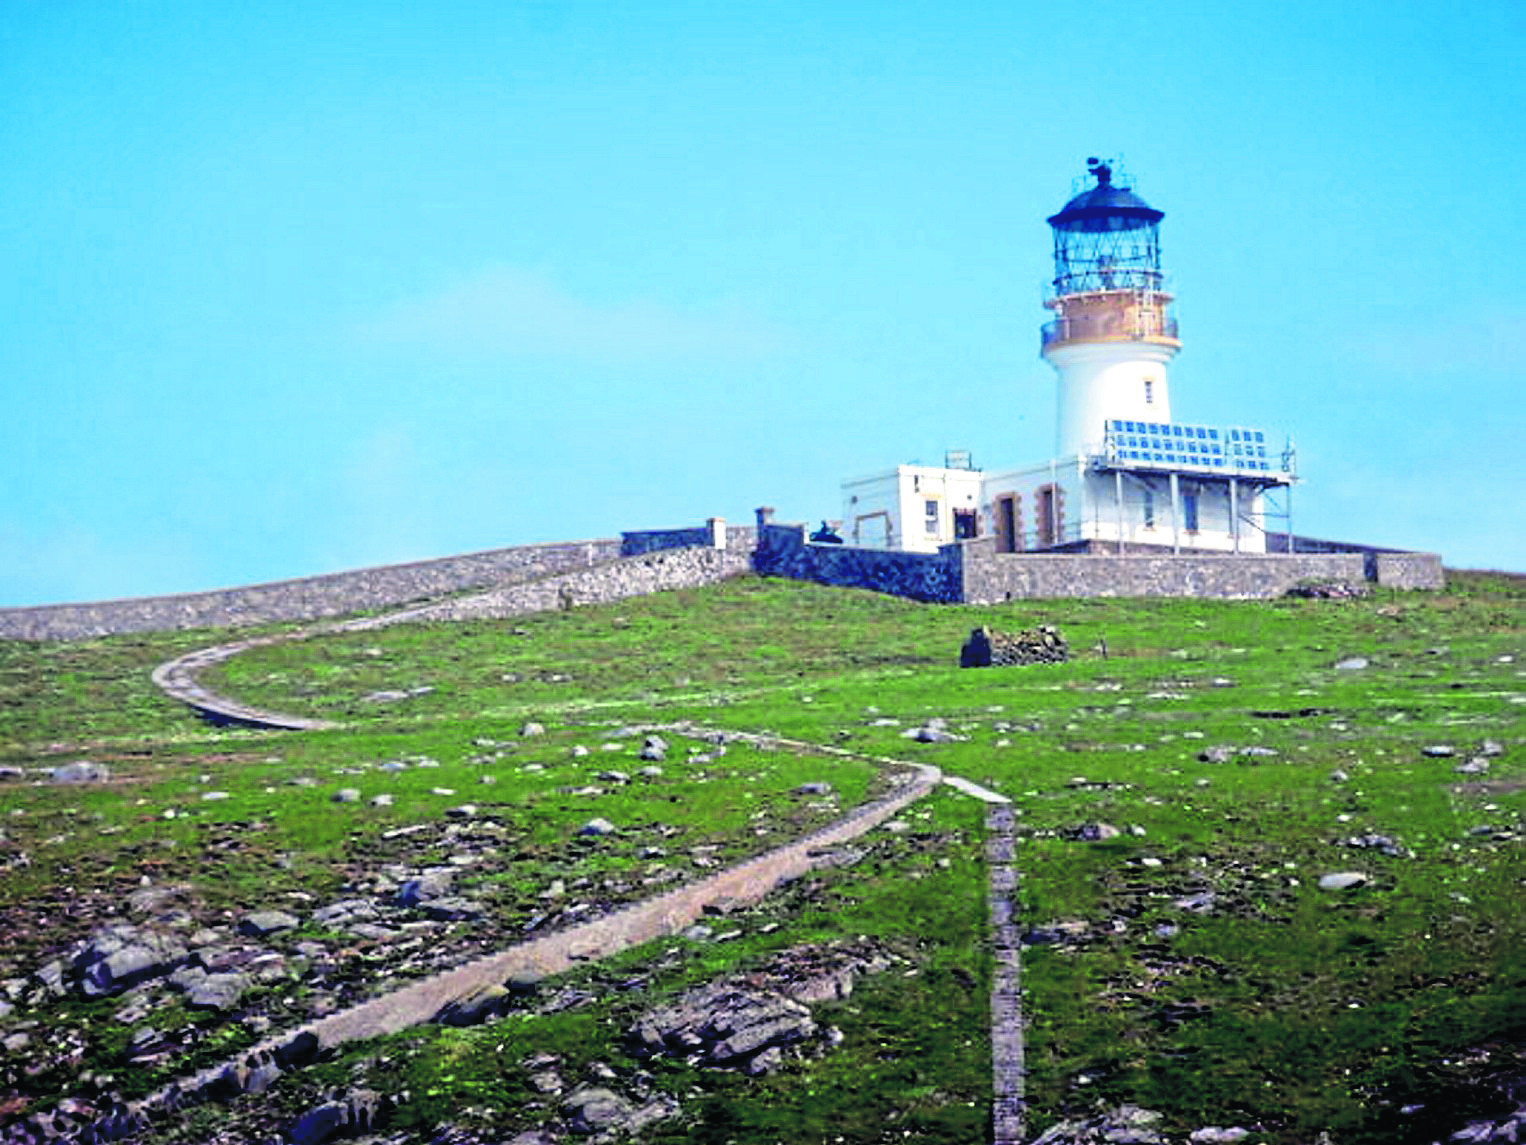 The Flannan Isles lighthouse is known for the mystery surrounding a trio of keepers who vanished from their posts back in December 1900



Please credit - © Copyright Chris Downer- Geograph.org.uk